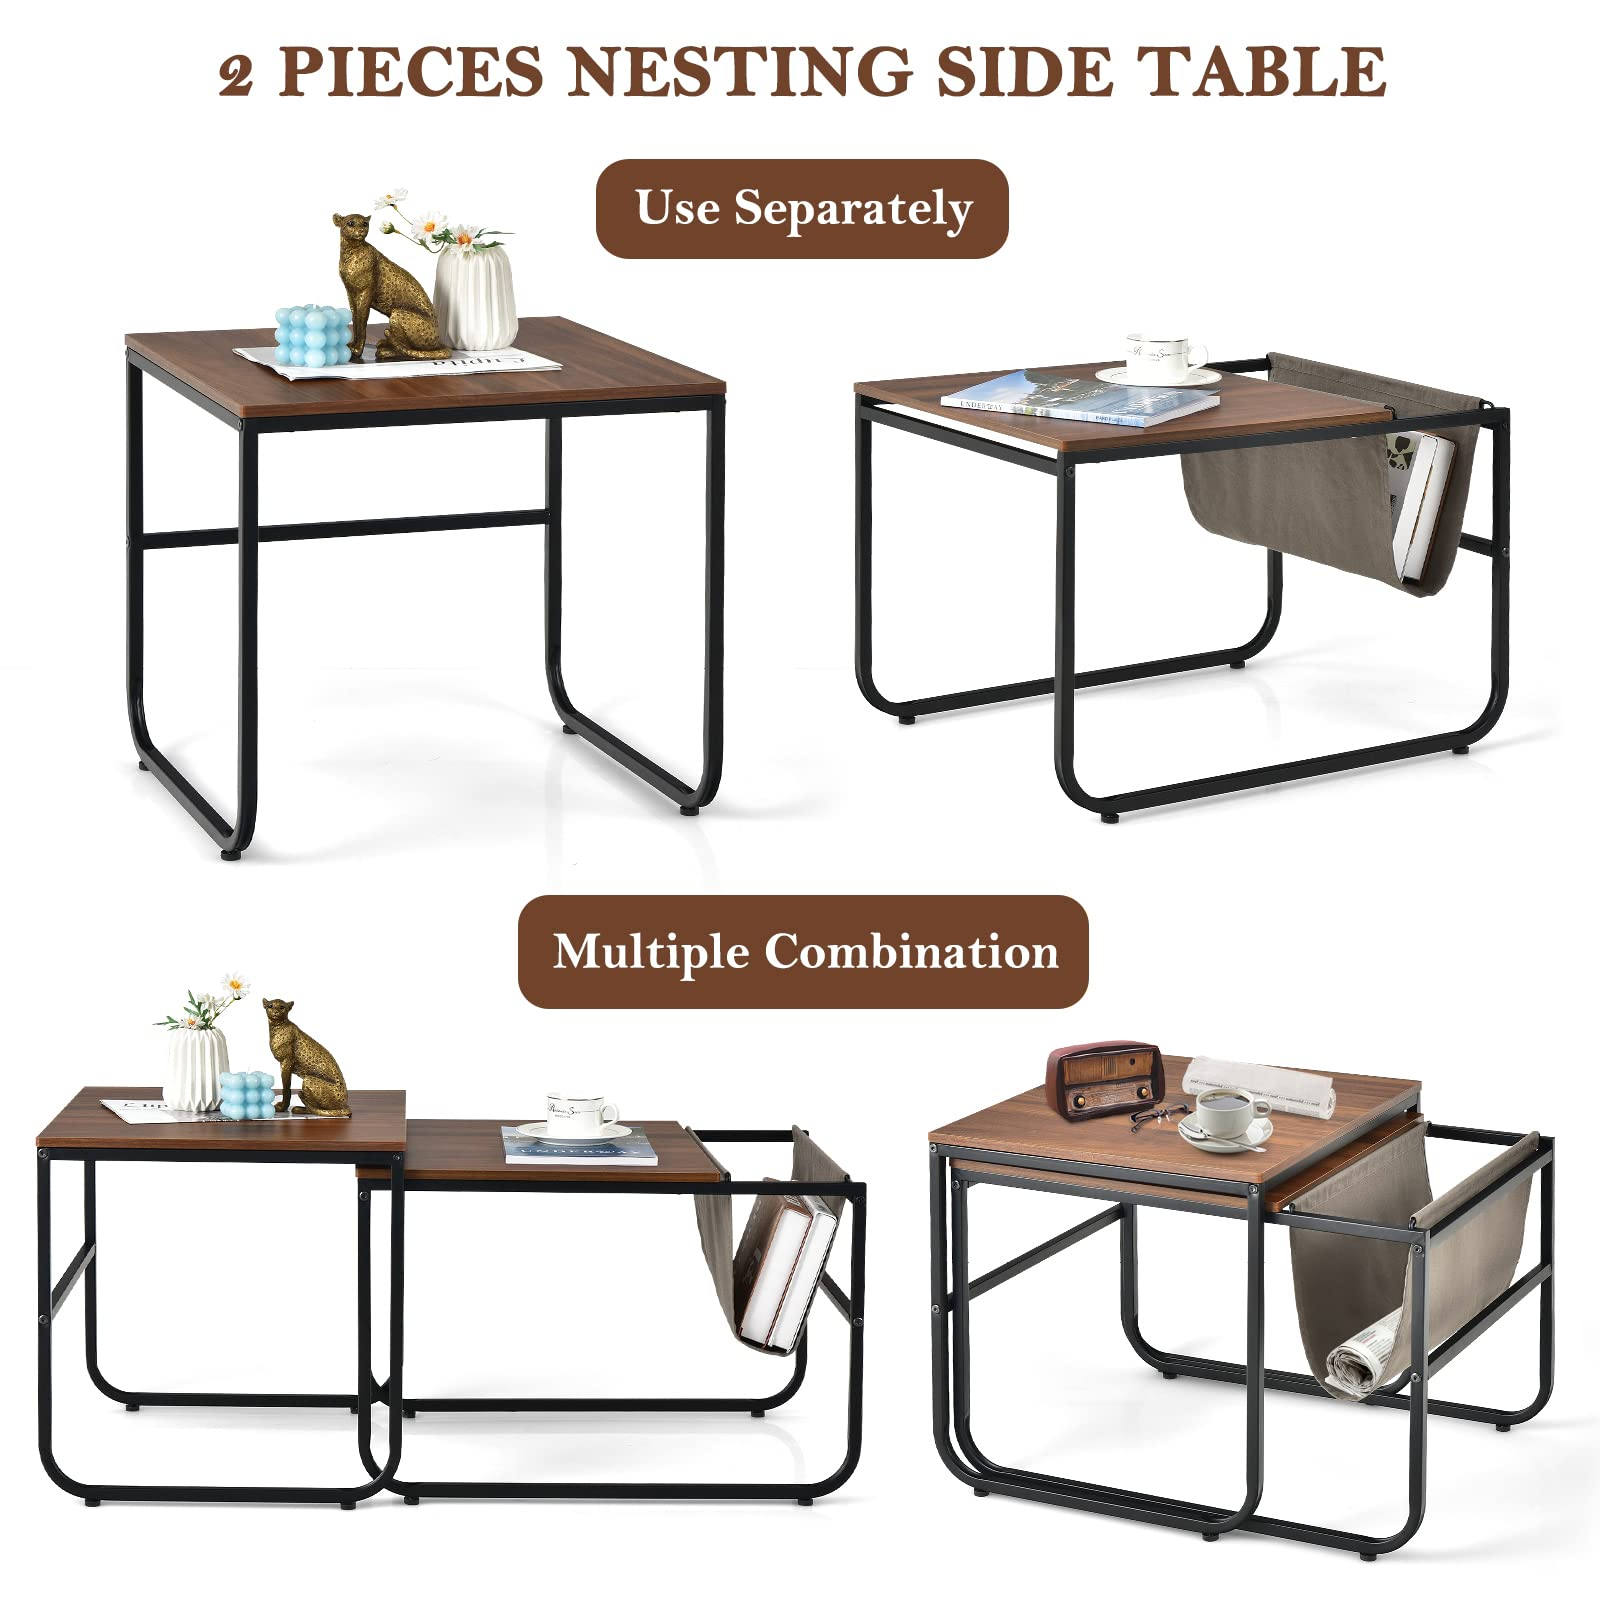 Nesting Coffee Table Set of 2, Stackable Side Table w/Side Pocket